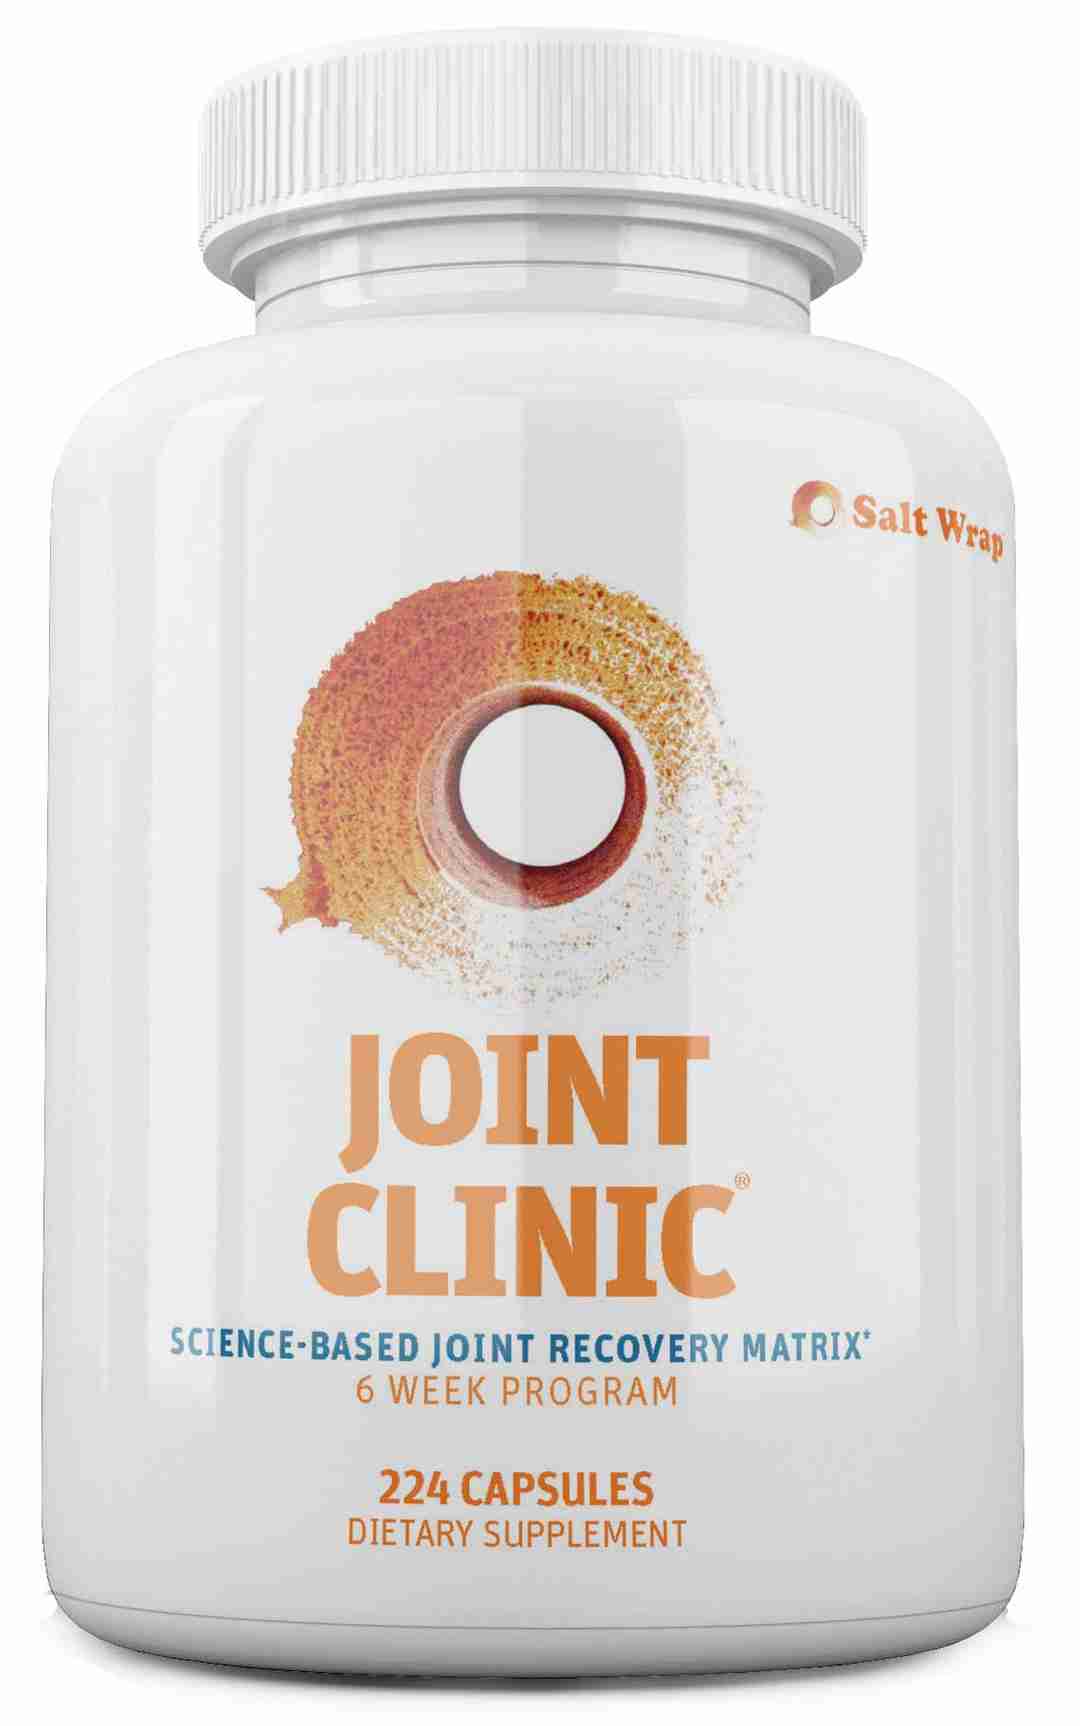 Joint Clinic ingredients and reviews SaltWrap injury recovery supplements